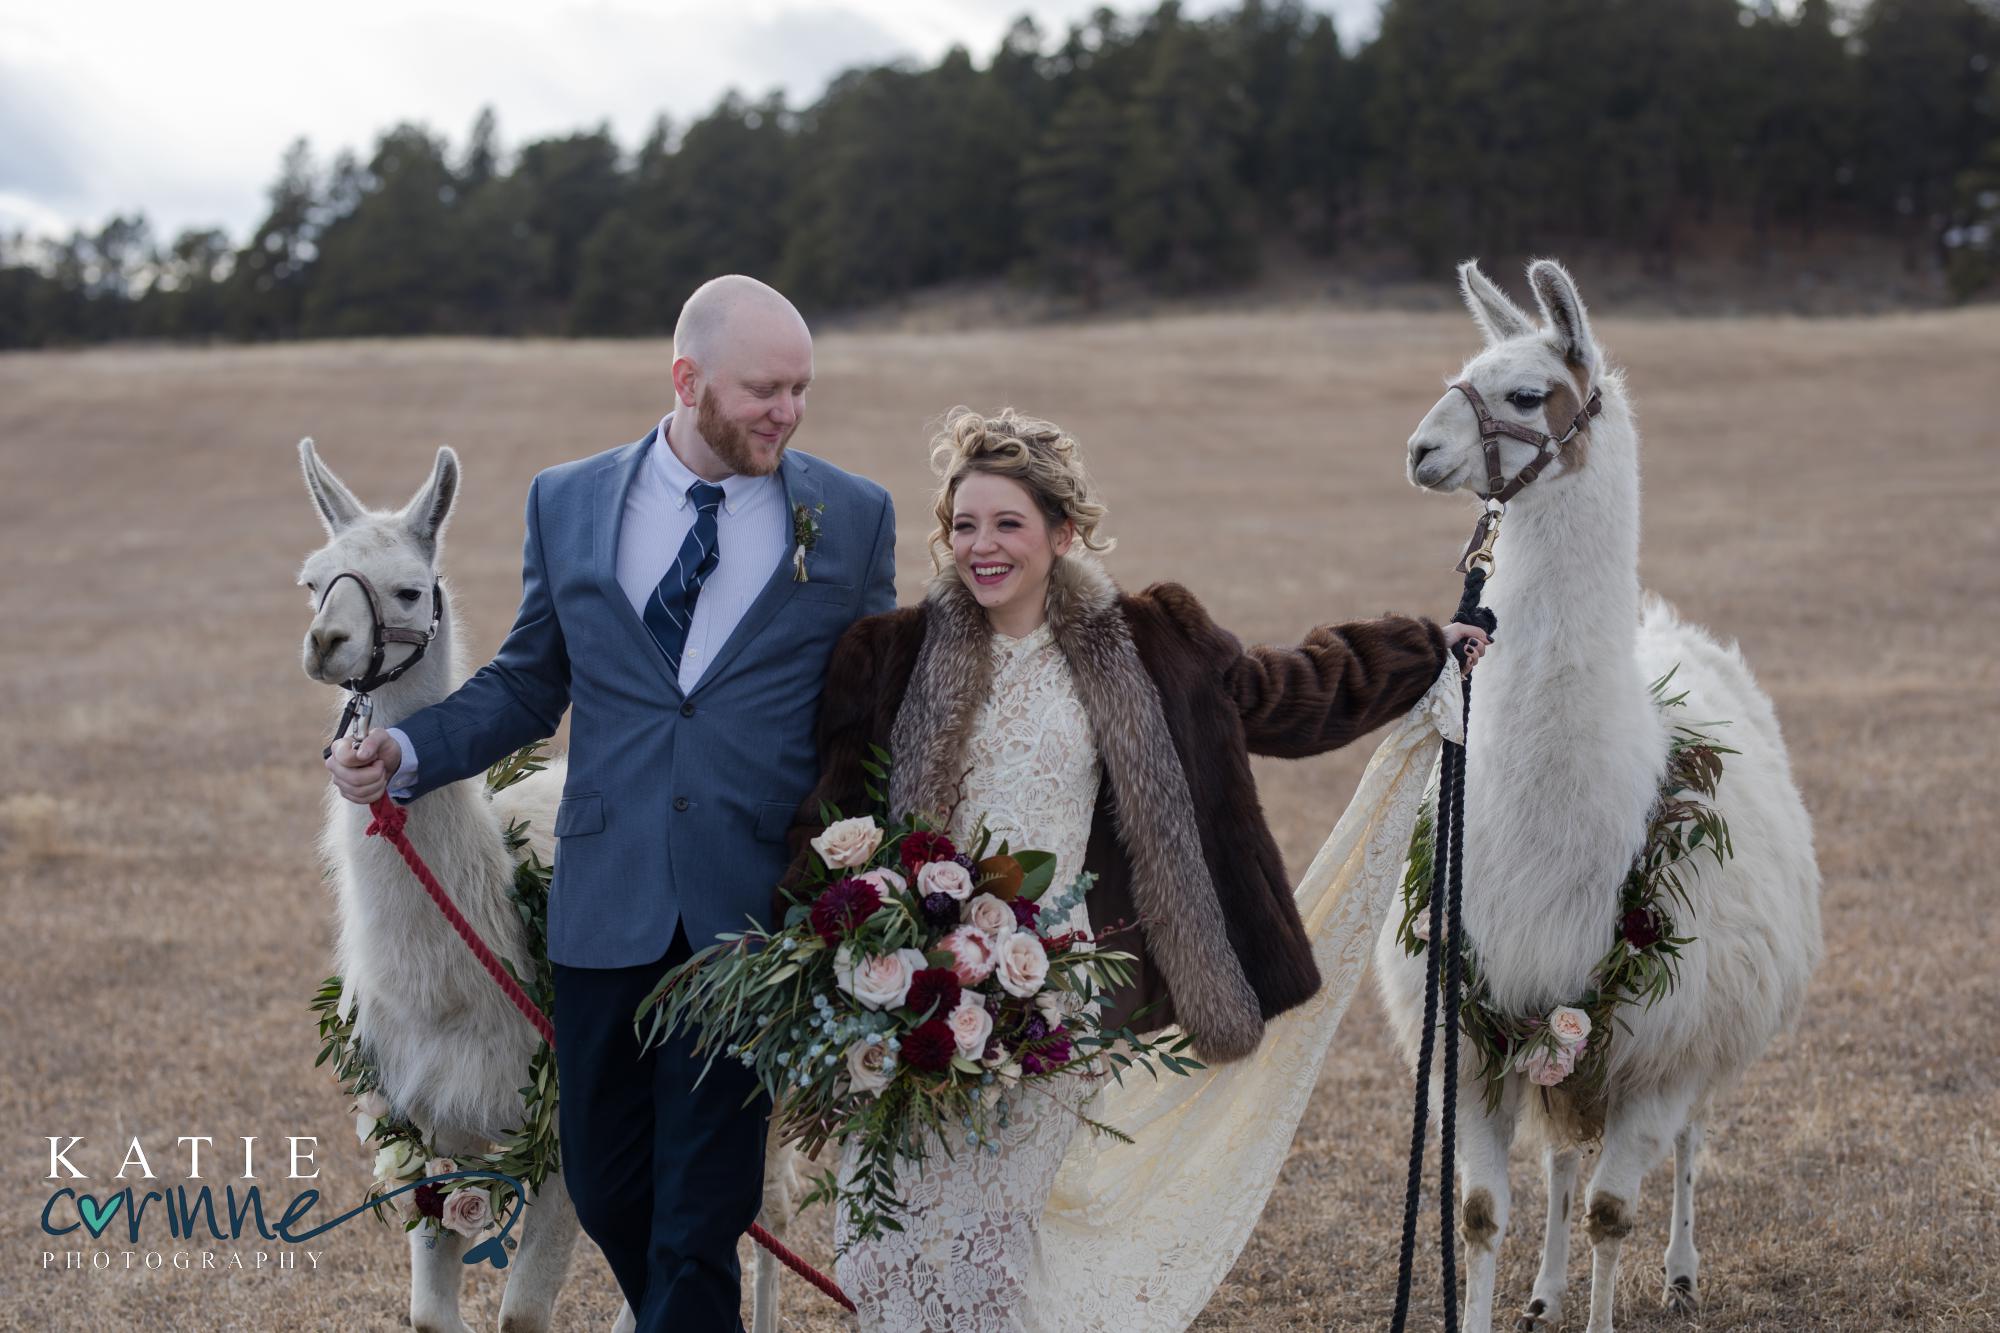 Two llamas and a groom wearing suit and bride wearing wedding dress and fur coat